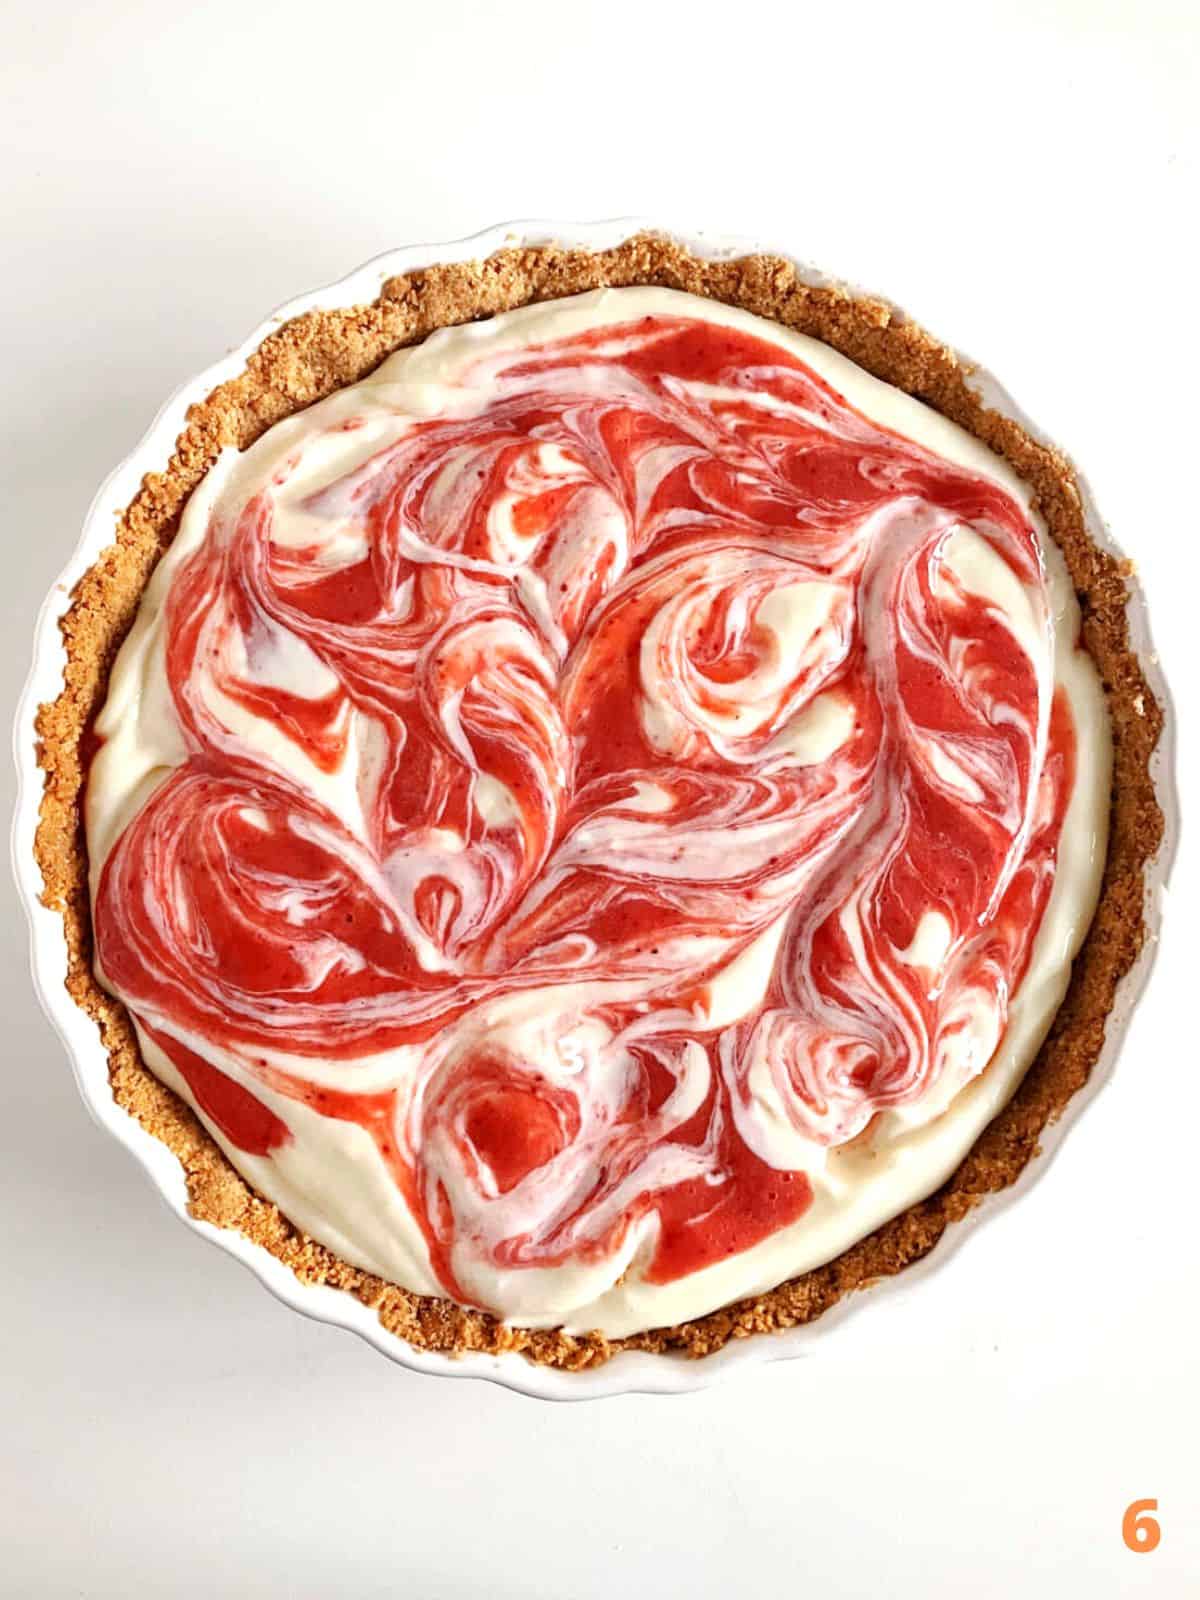 Swirled strawberry cream cheese pie with crumb crust in white dish on a white surface.